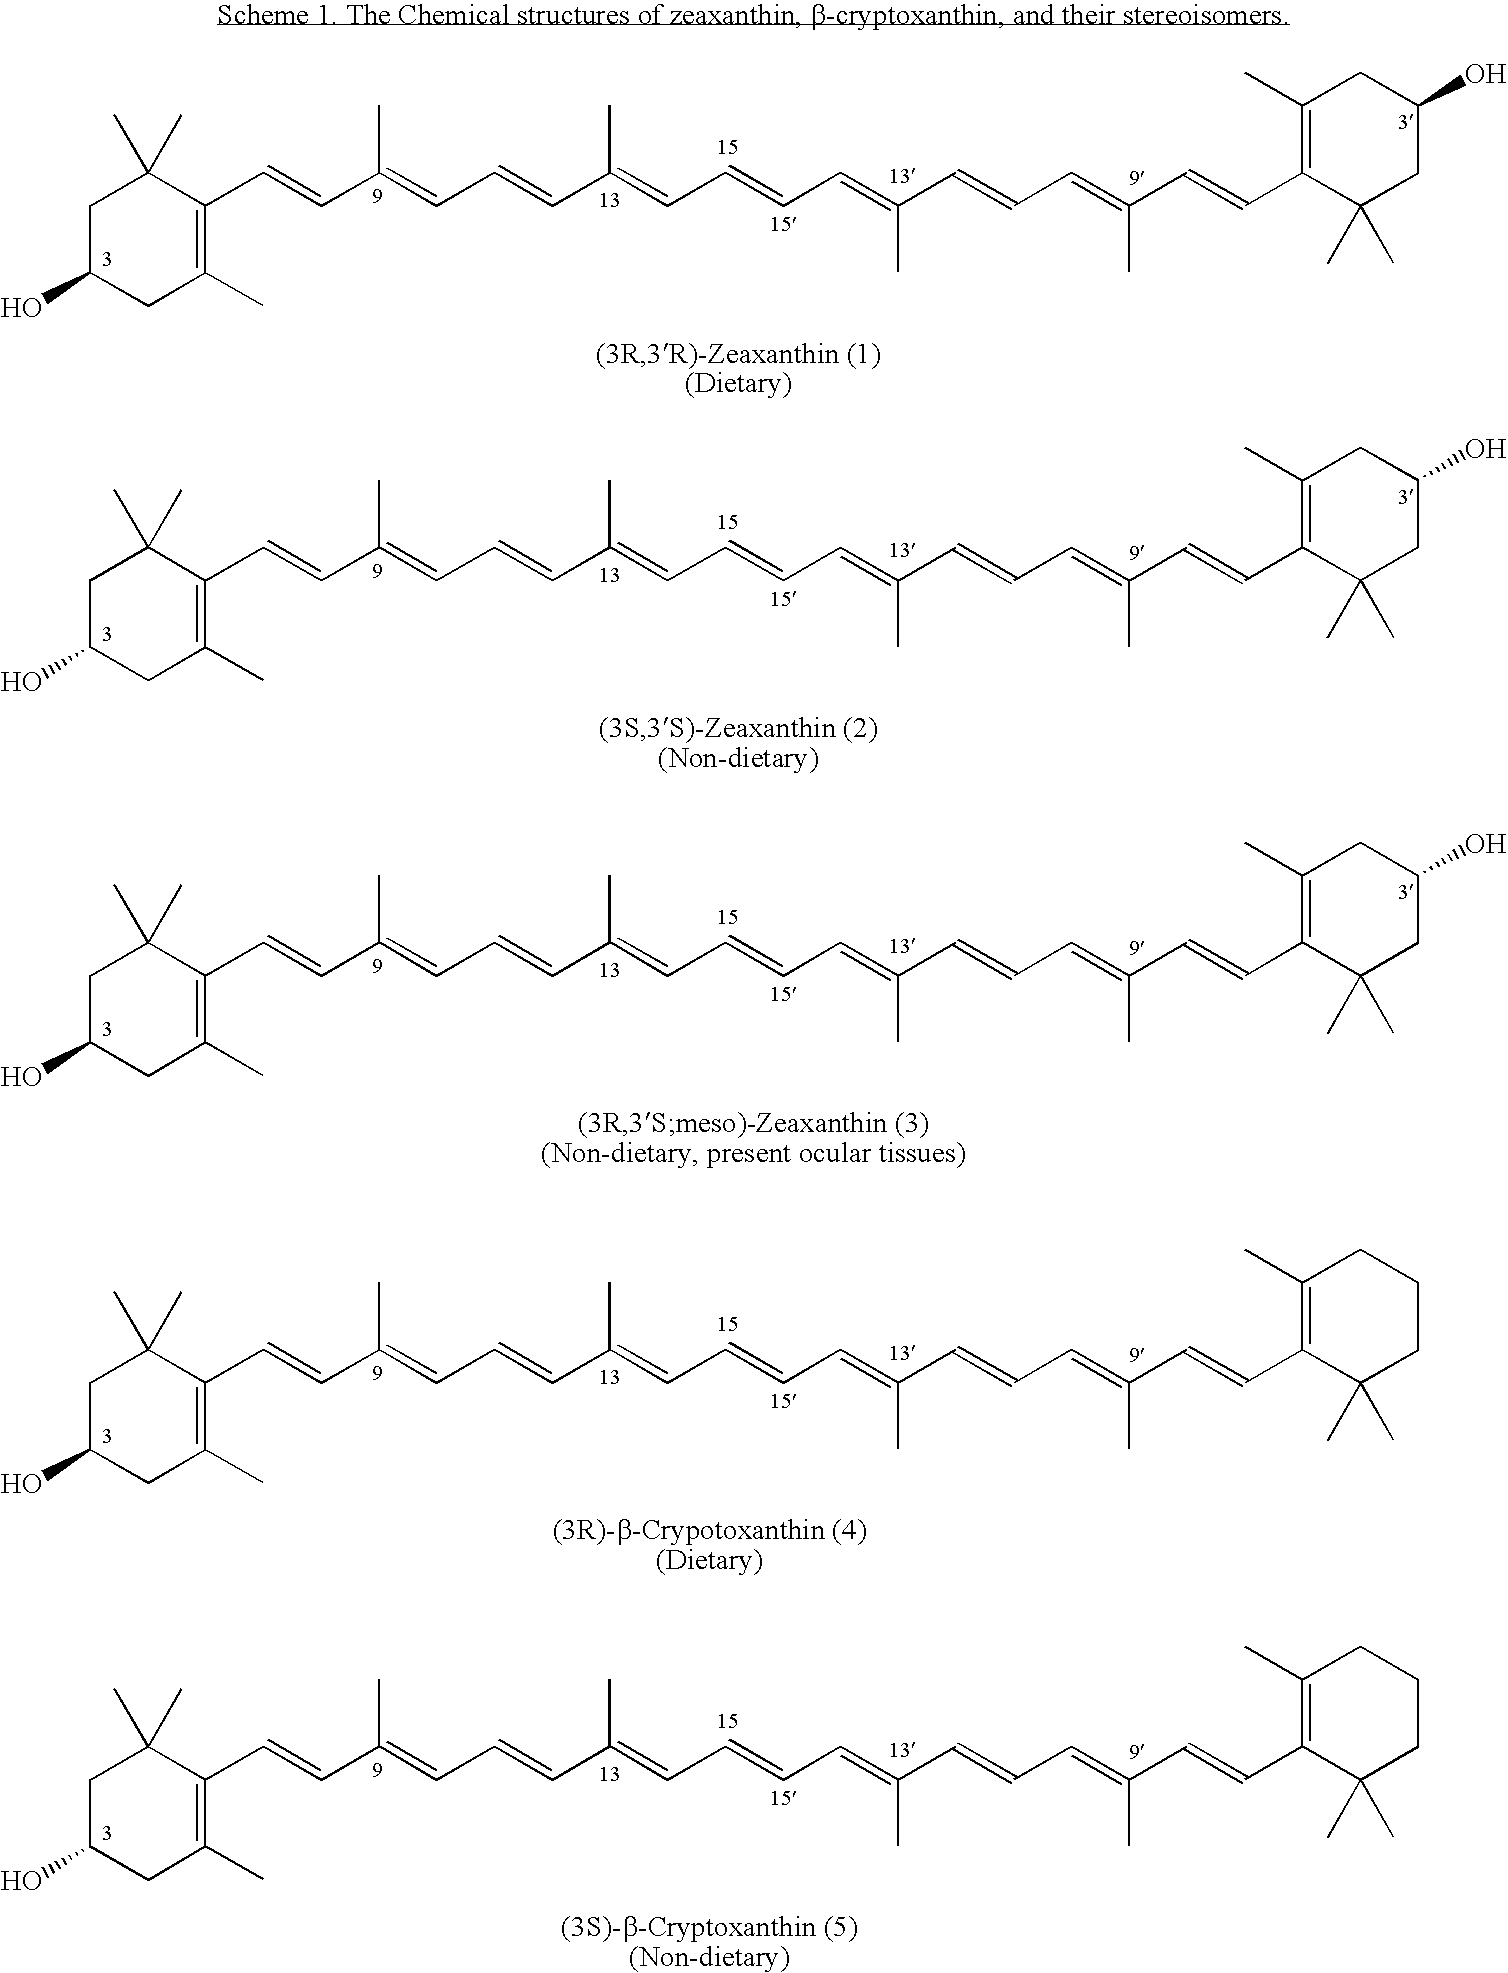 Process for Synthesis of (3S)- and (3R)-3-Hydroxy-Beta-Ionone, and Their Transformation to Zeaxanthin and Beta-Cryptoxanthin